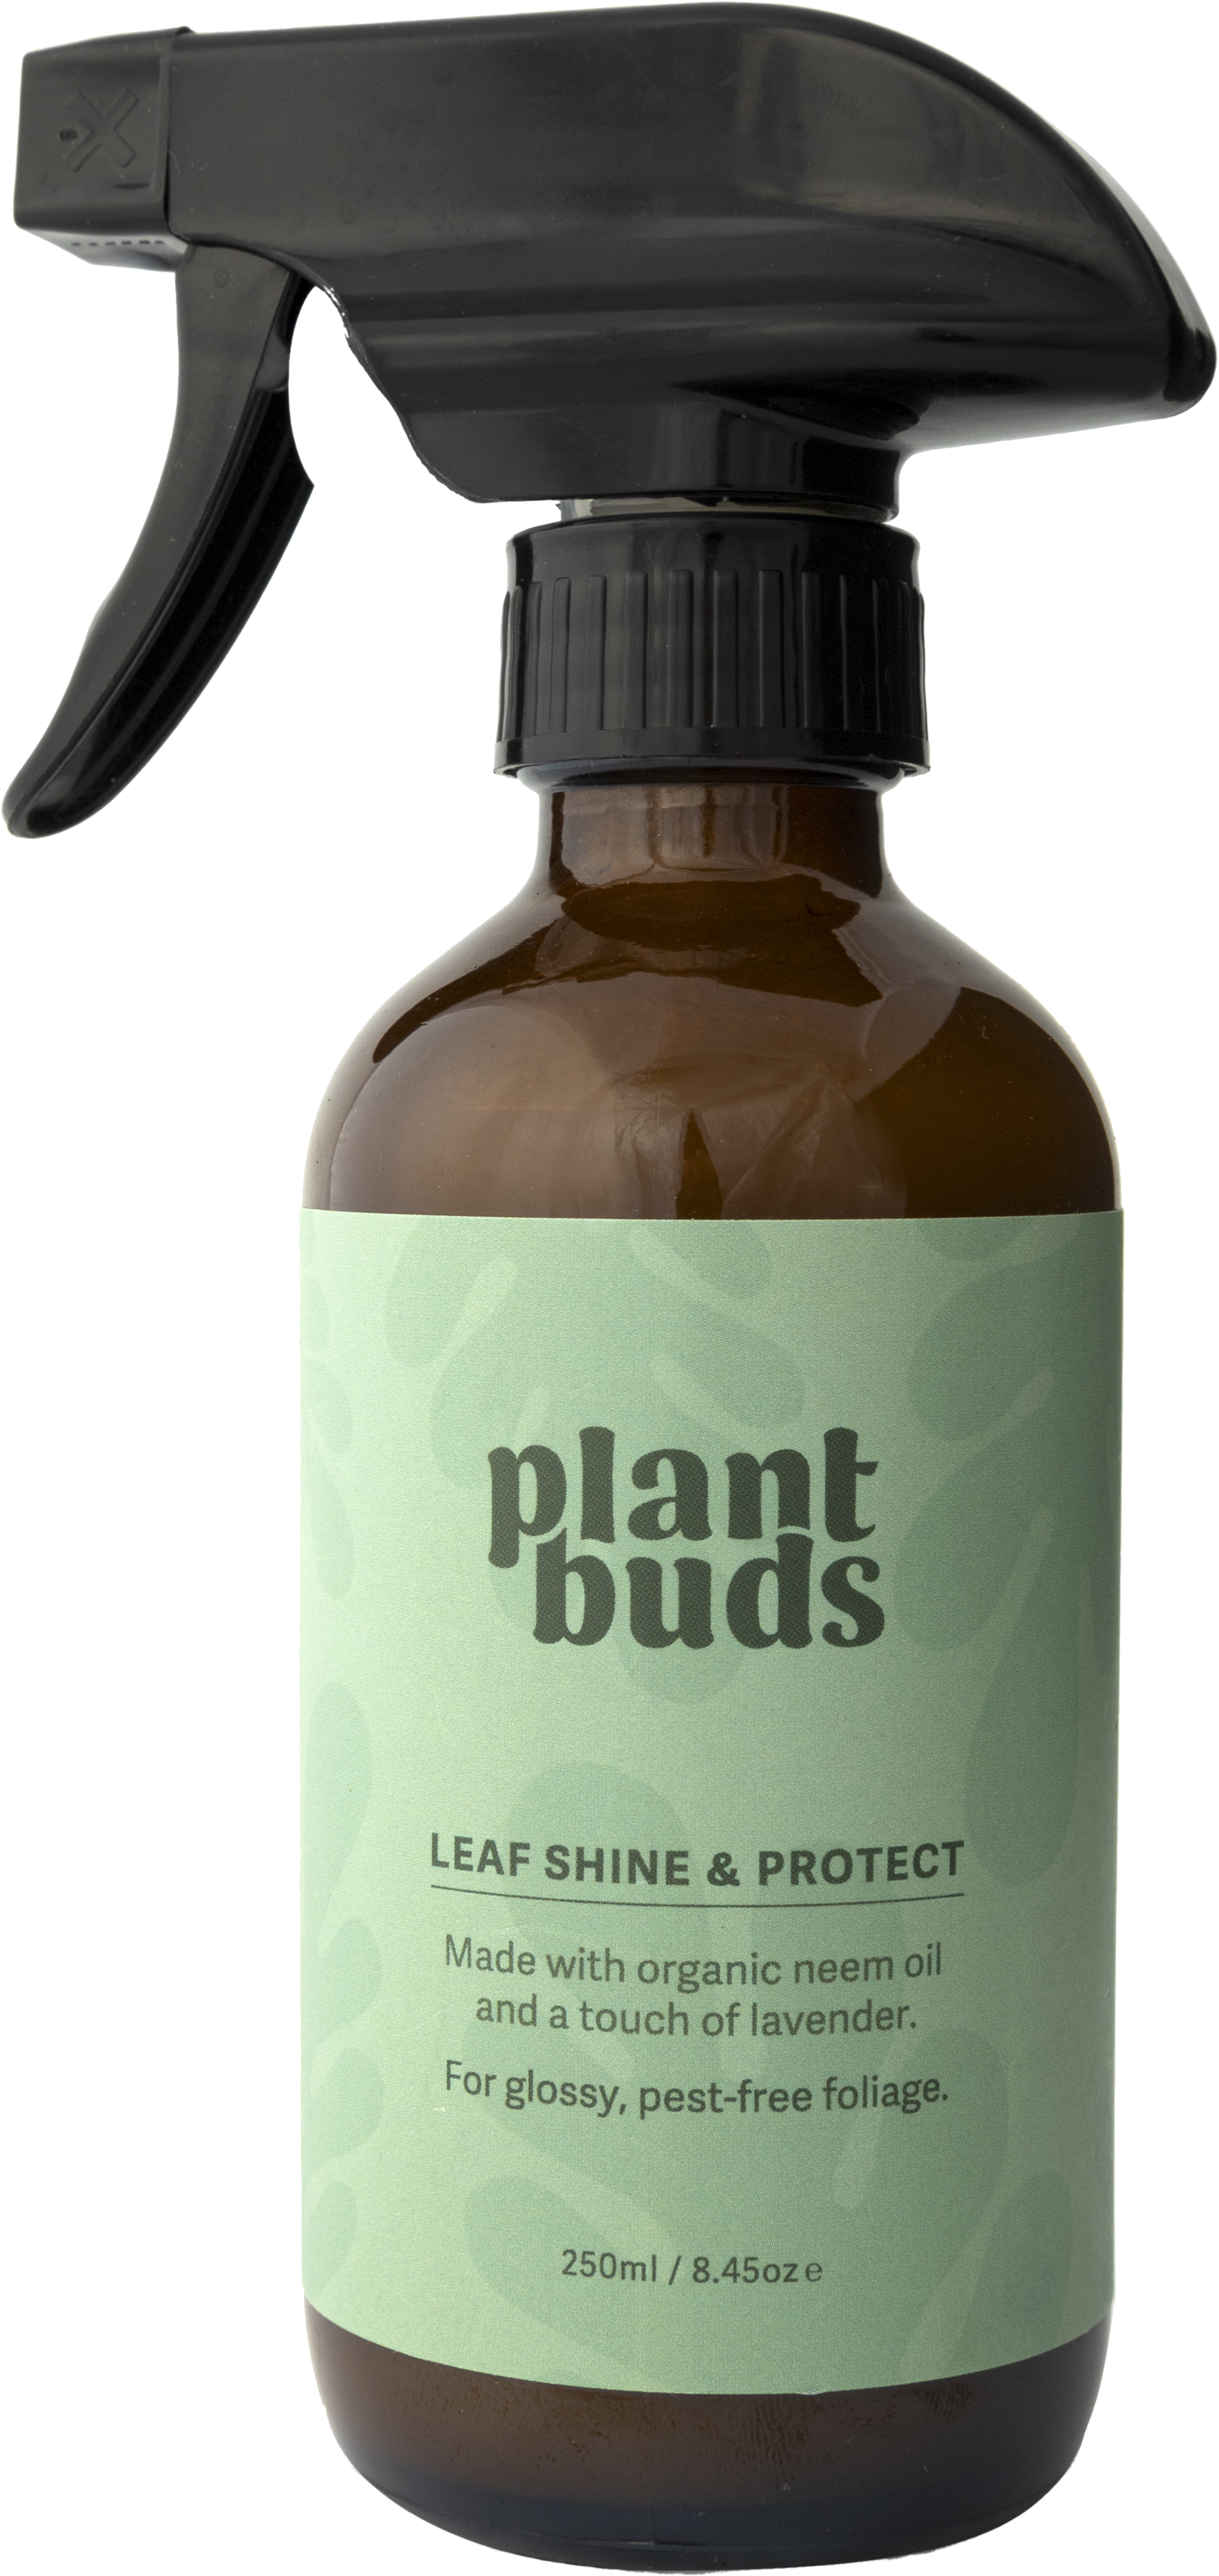 Plantbuds leaf shine and protect neem oil